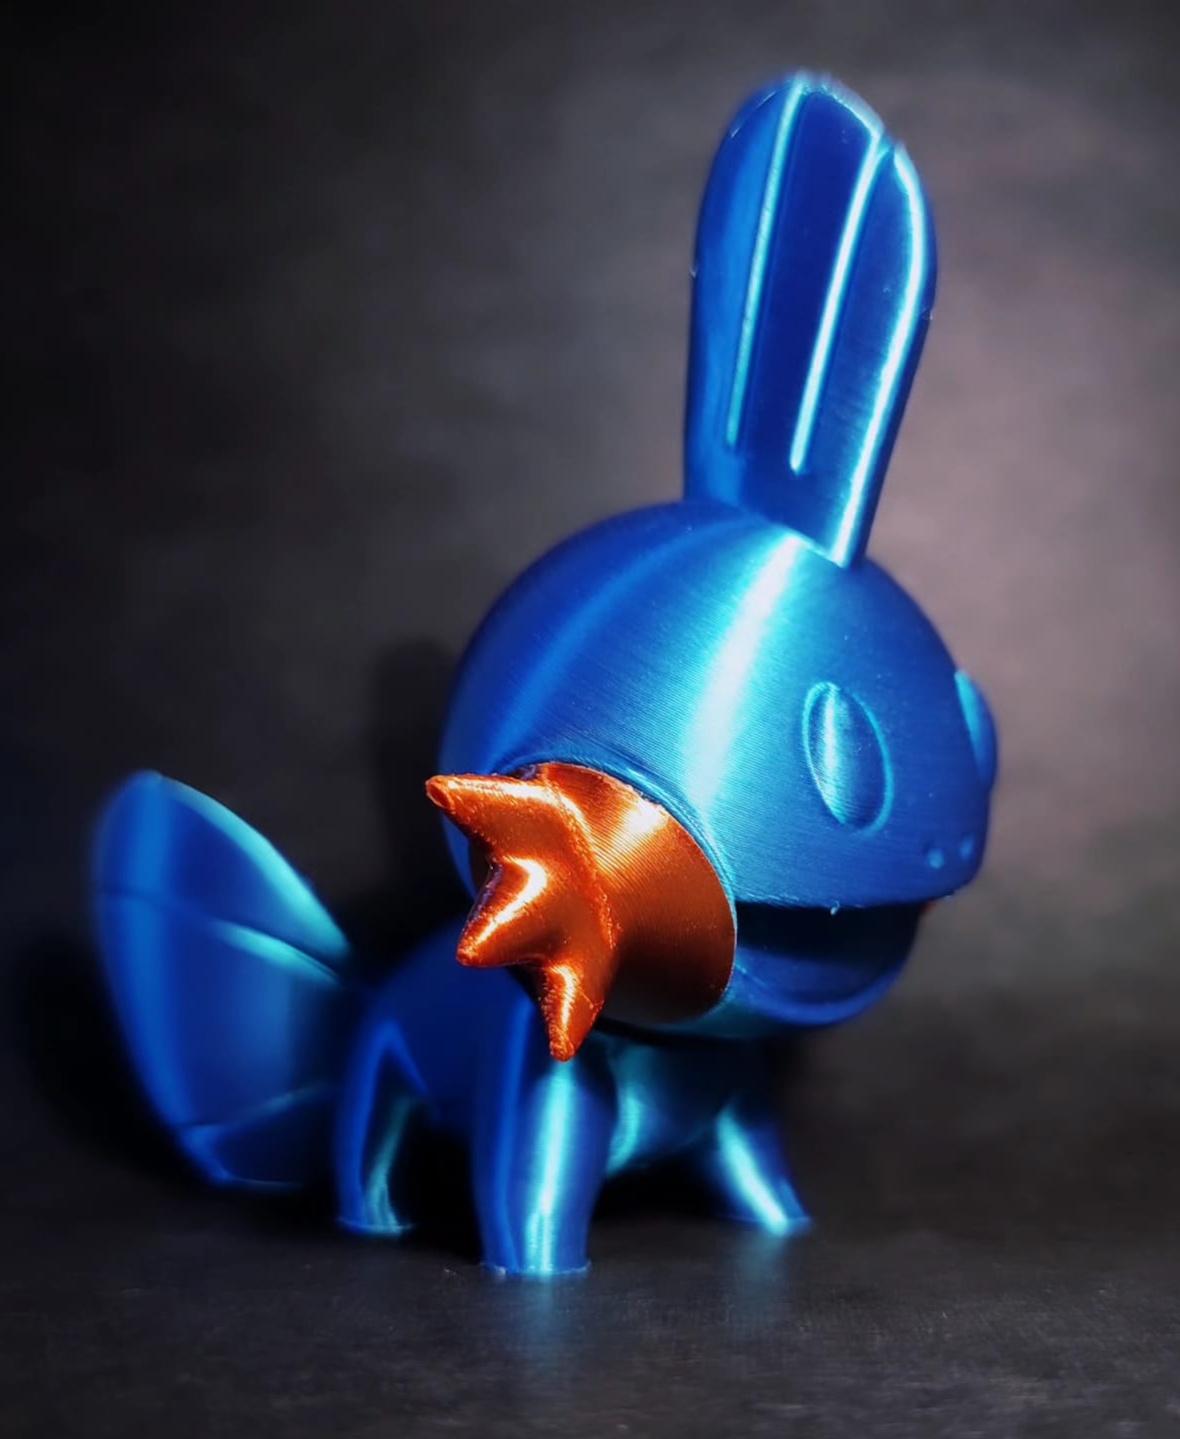 Mudkip  - Prints Awesome !
Check my insta page @3Doodling for more makes! ;) - 3d model